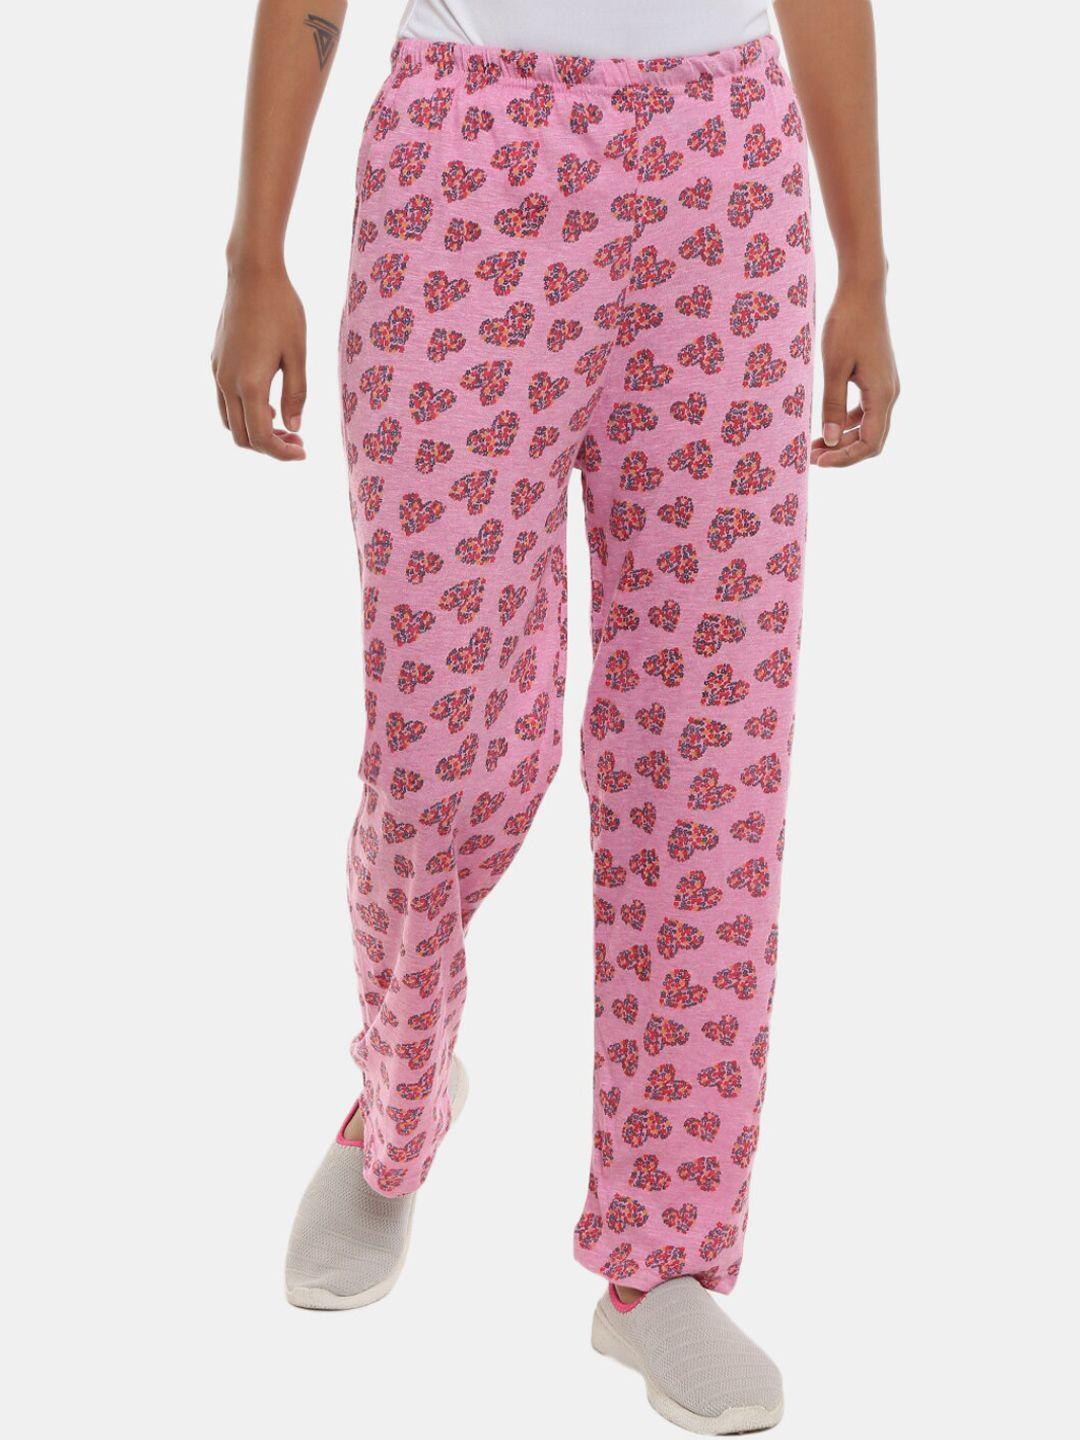 v-mart women printed mid-rise straight fit cotton lounge pants